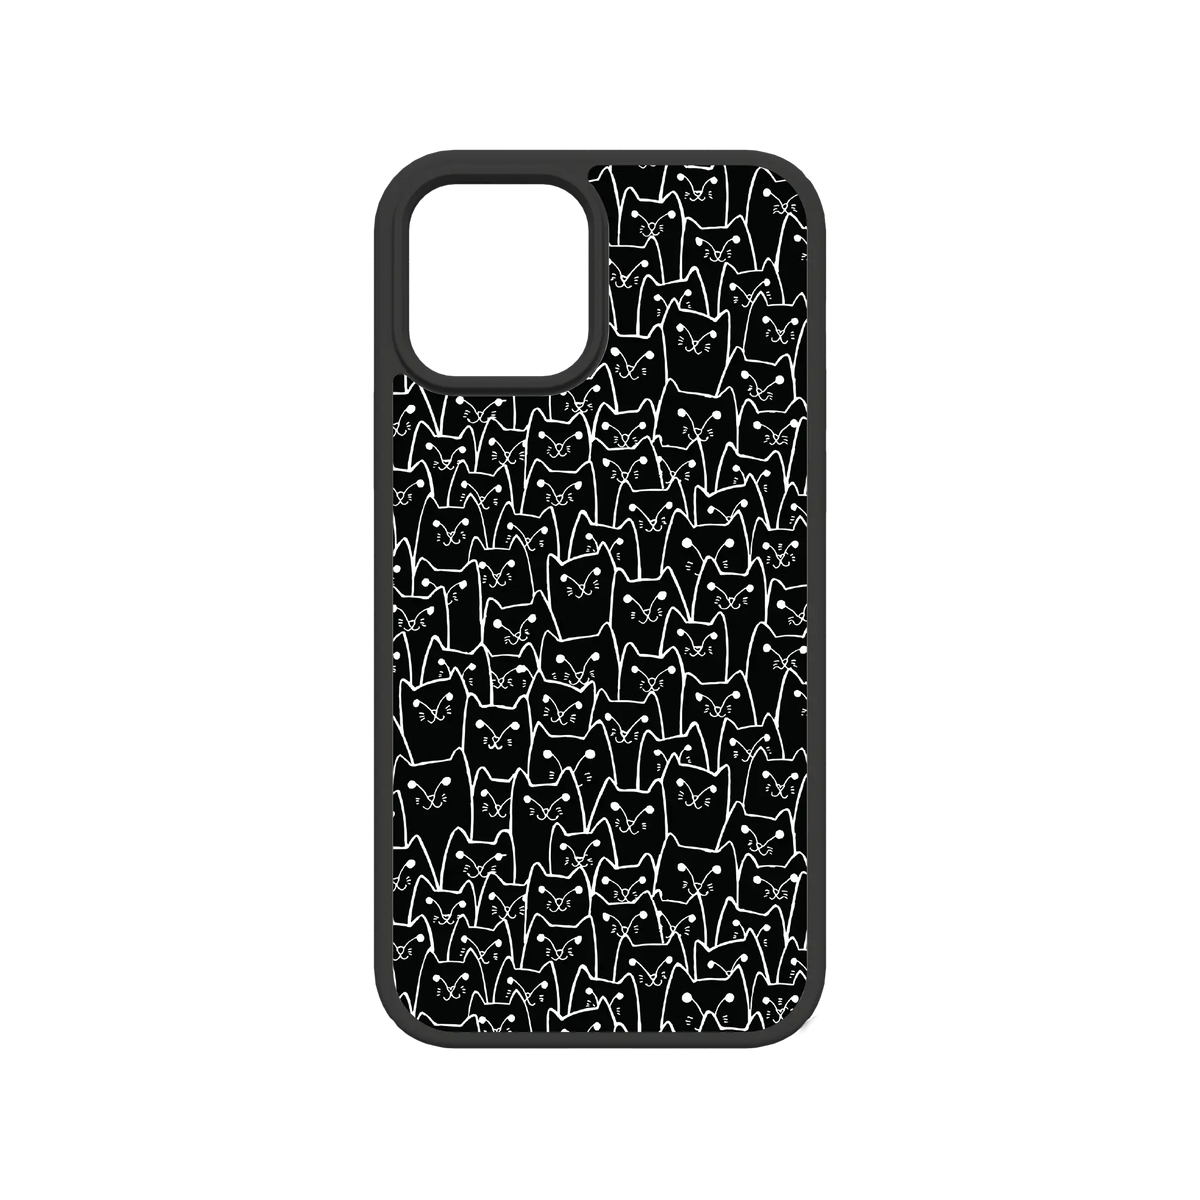 Apple-iPhone-12-12-Pro-Crystal-Clear Black Cat Pattern | Protective MagSafe Case | Cats Meow Series for Apple iPhone 12 Series cellhelmet cellhelmet